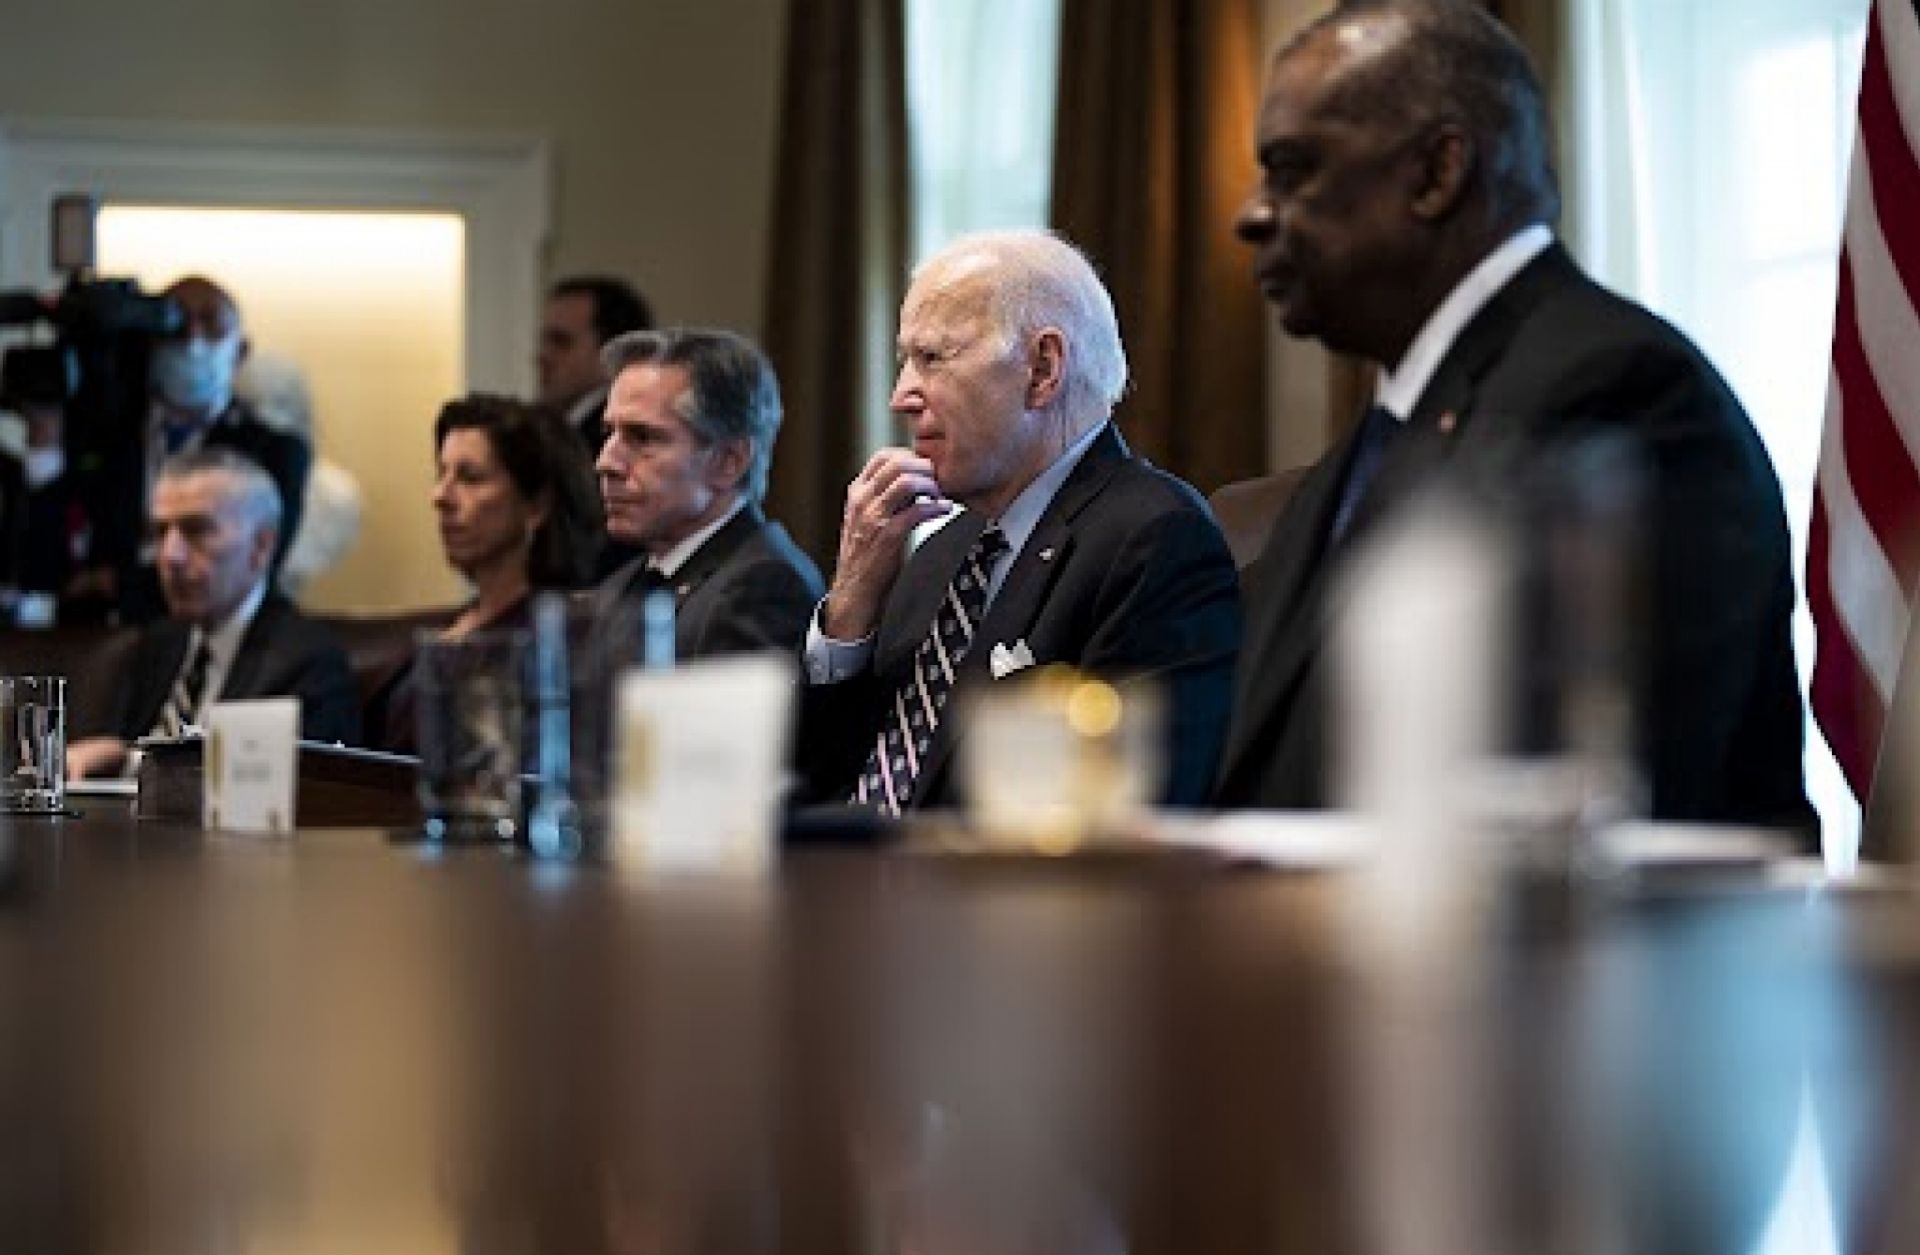 (From left to right) U.S. Secretary of State Antony Blinkin, U.S. President Joe Biden and U.S. Defense Secretary Lloyd Austin meet with Colombian President Ivan Duque at the White House on March 10, 2022, following a recent meeting between U.S. and Venezuelan officials where the possibility of easing oil sanctions was discussed. 